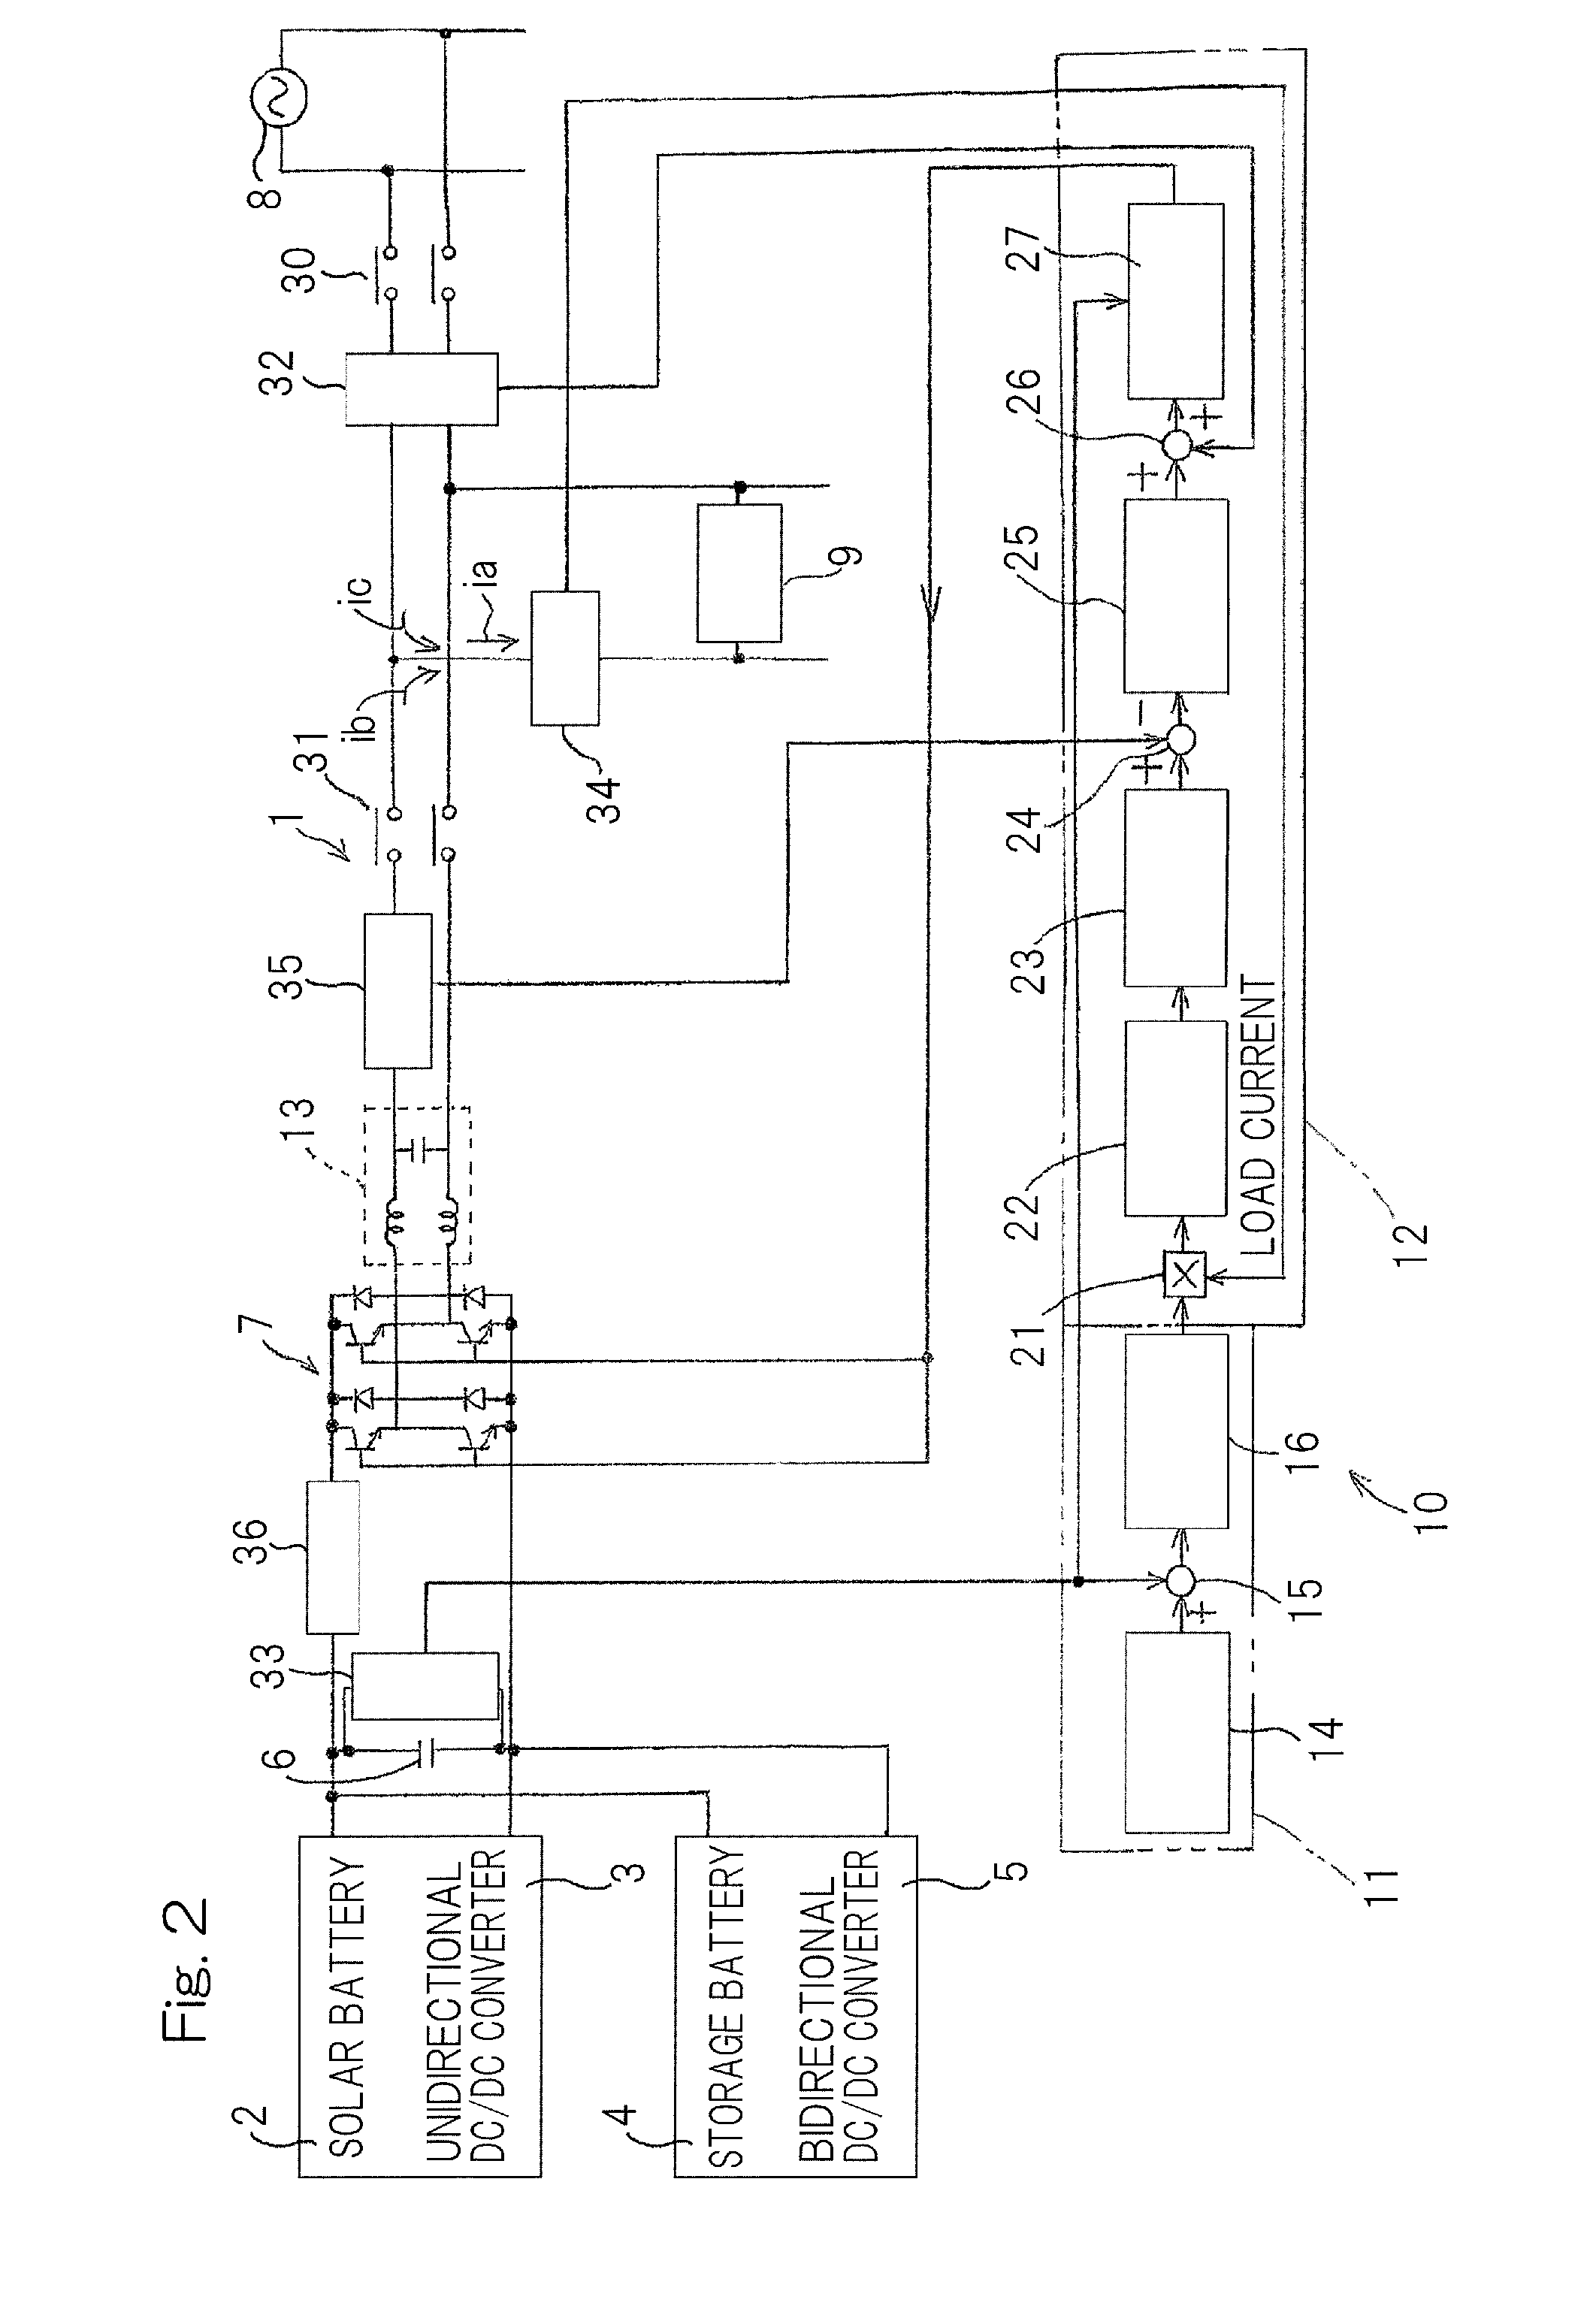 Distributed power source system with storage battery